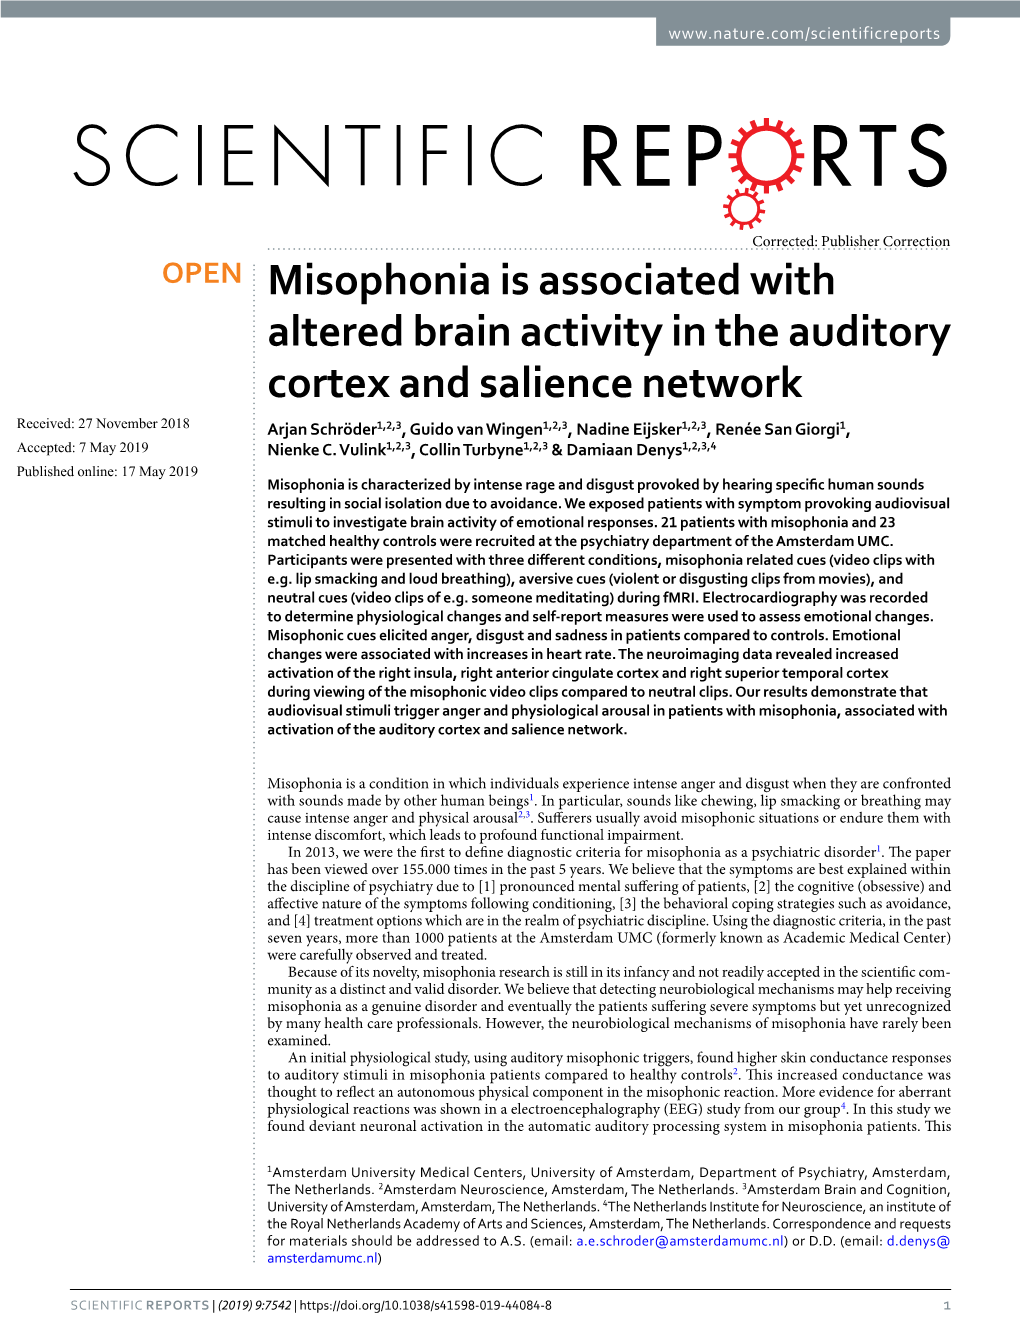 Misophonia Is Associated with Altered Brain Activity in the Auditory Cortex